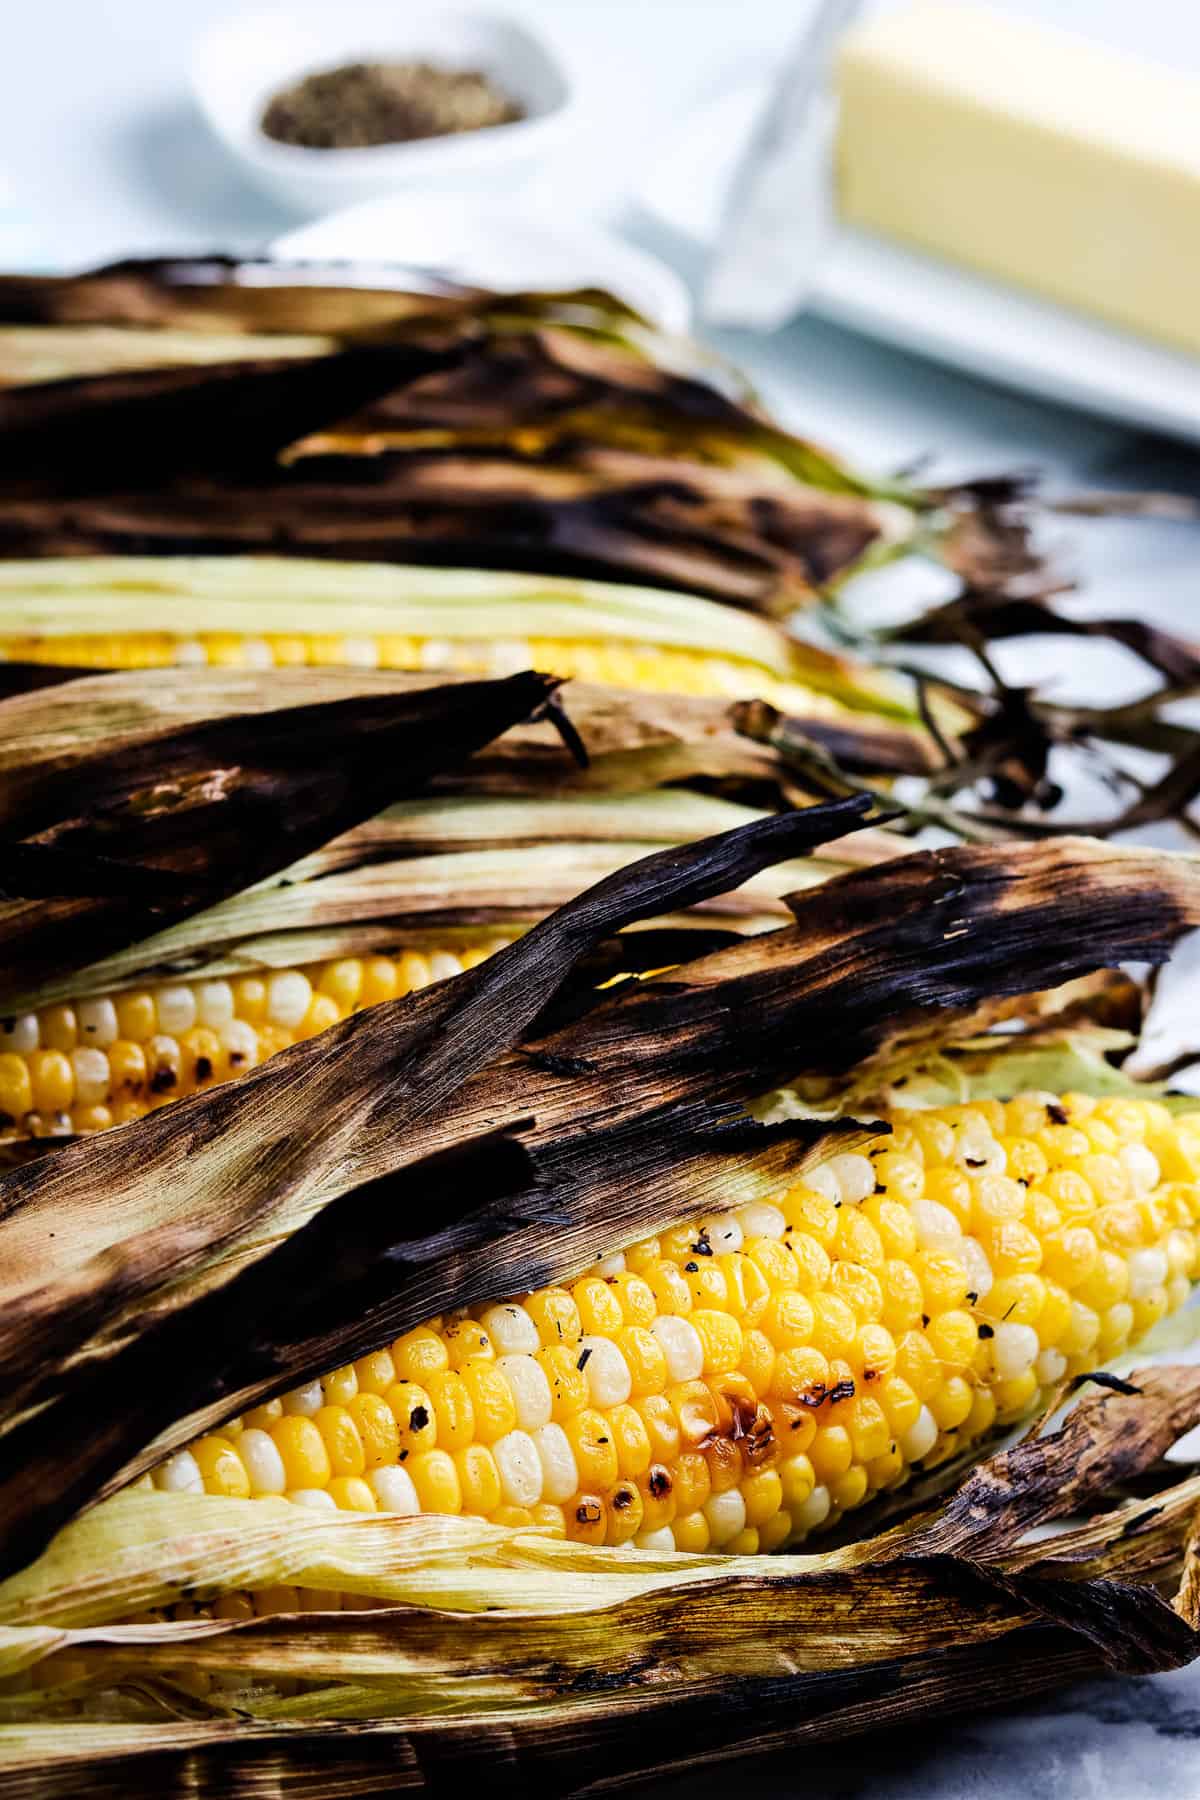 Pieces of grilled corn on the cob with husk